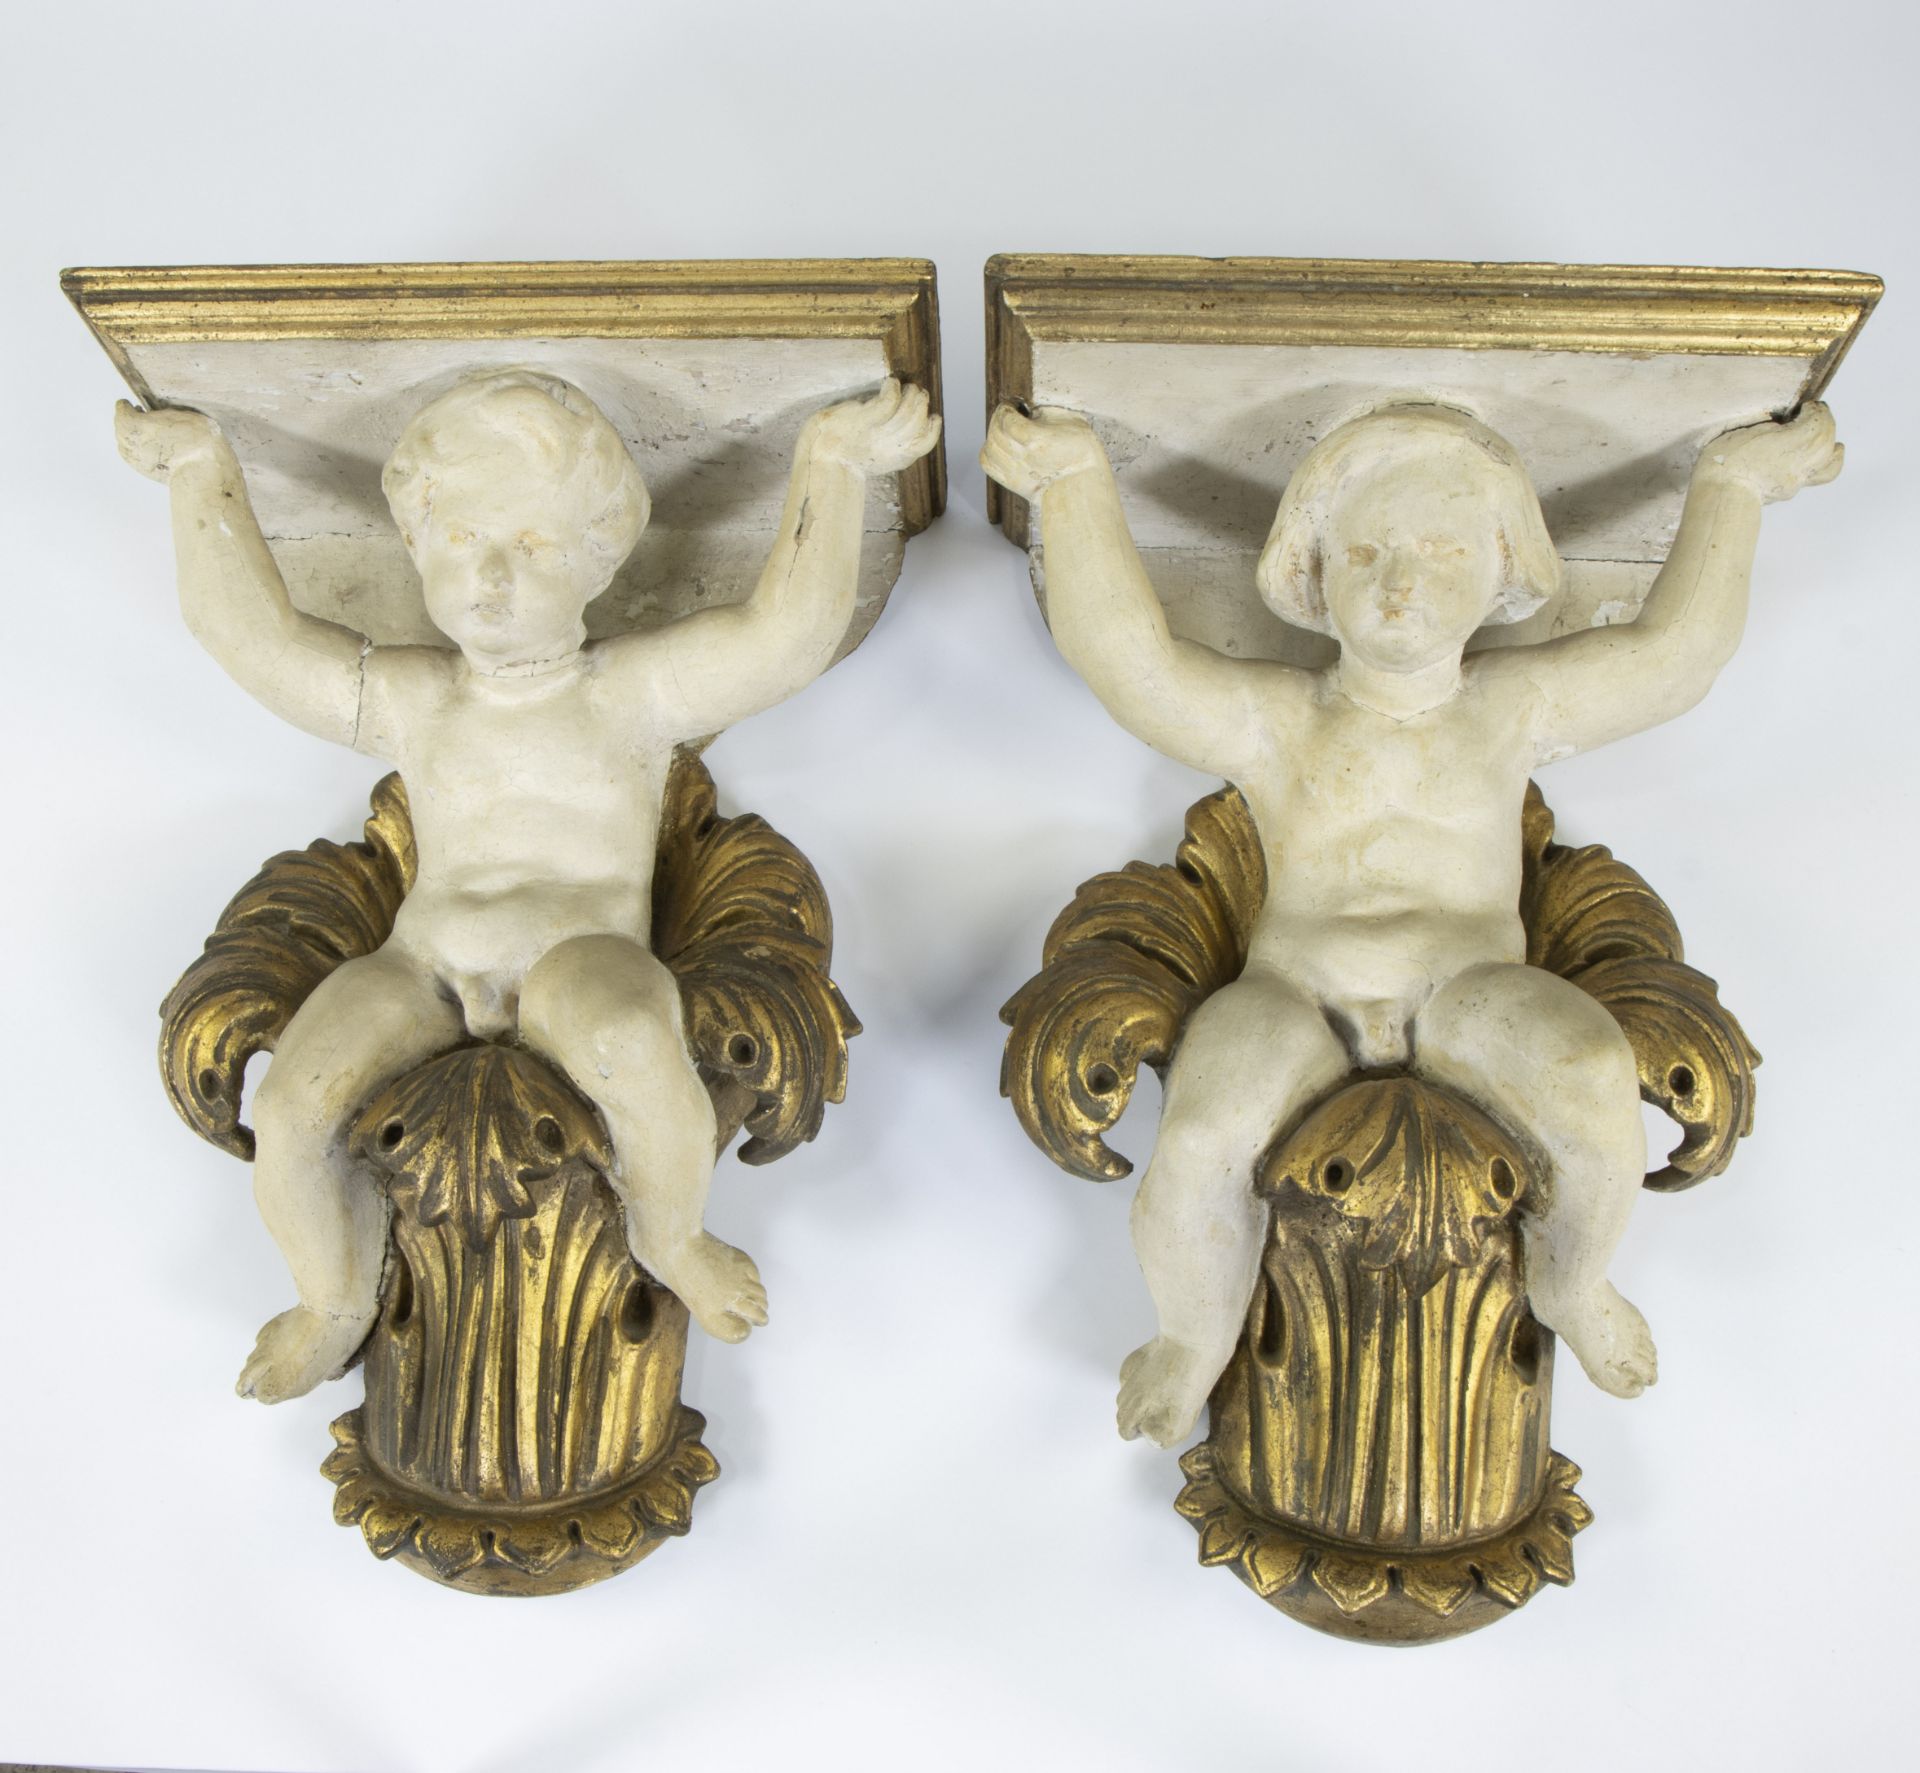 Pair of Baroque gilded wooden consoles, 18th century